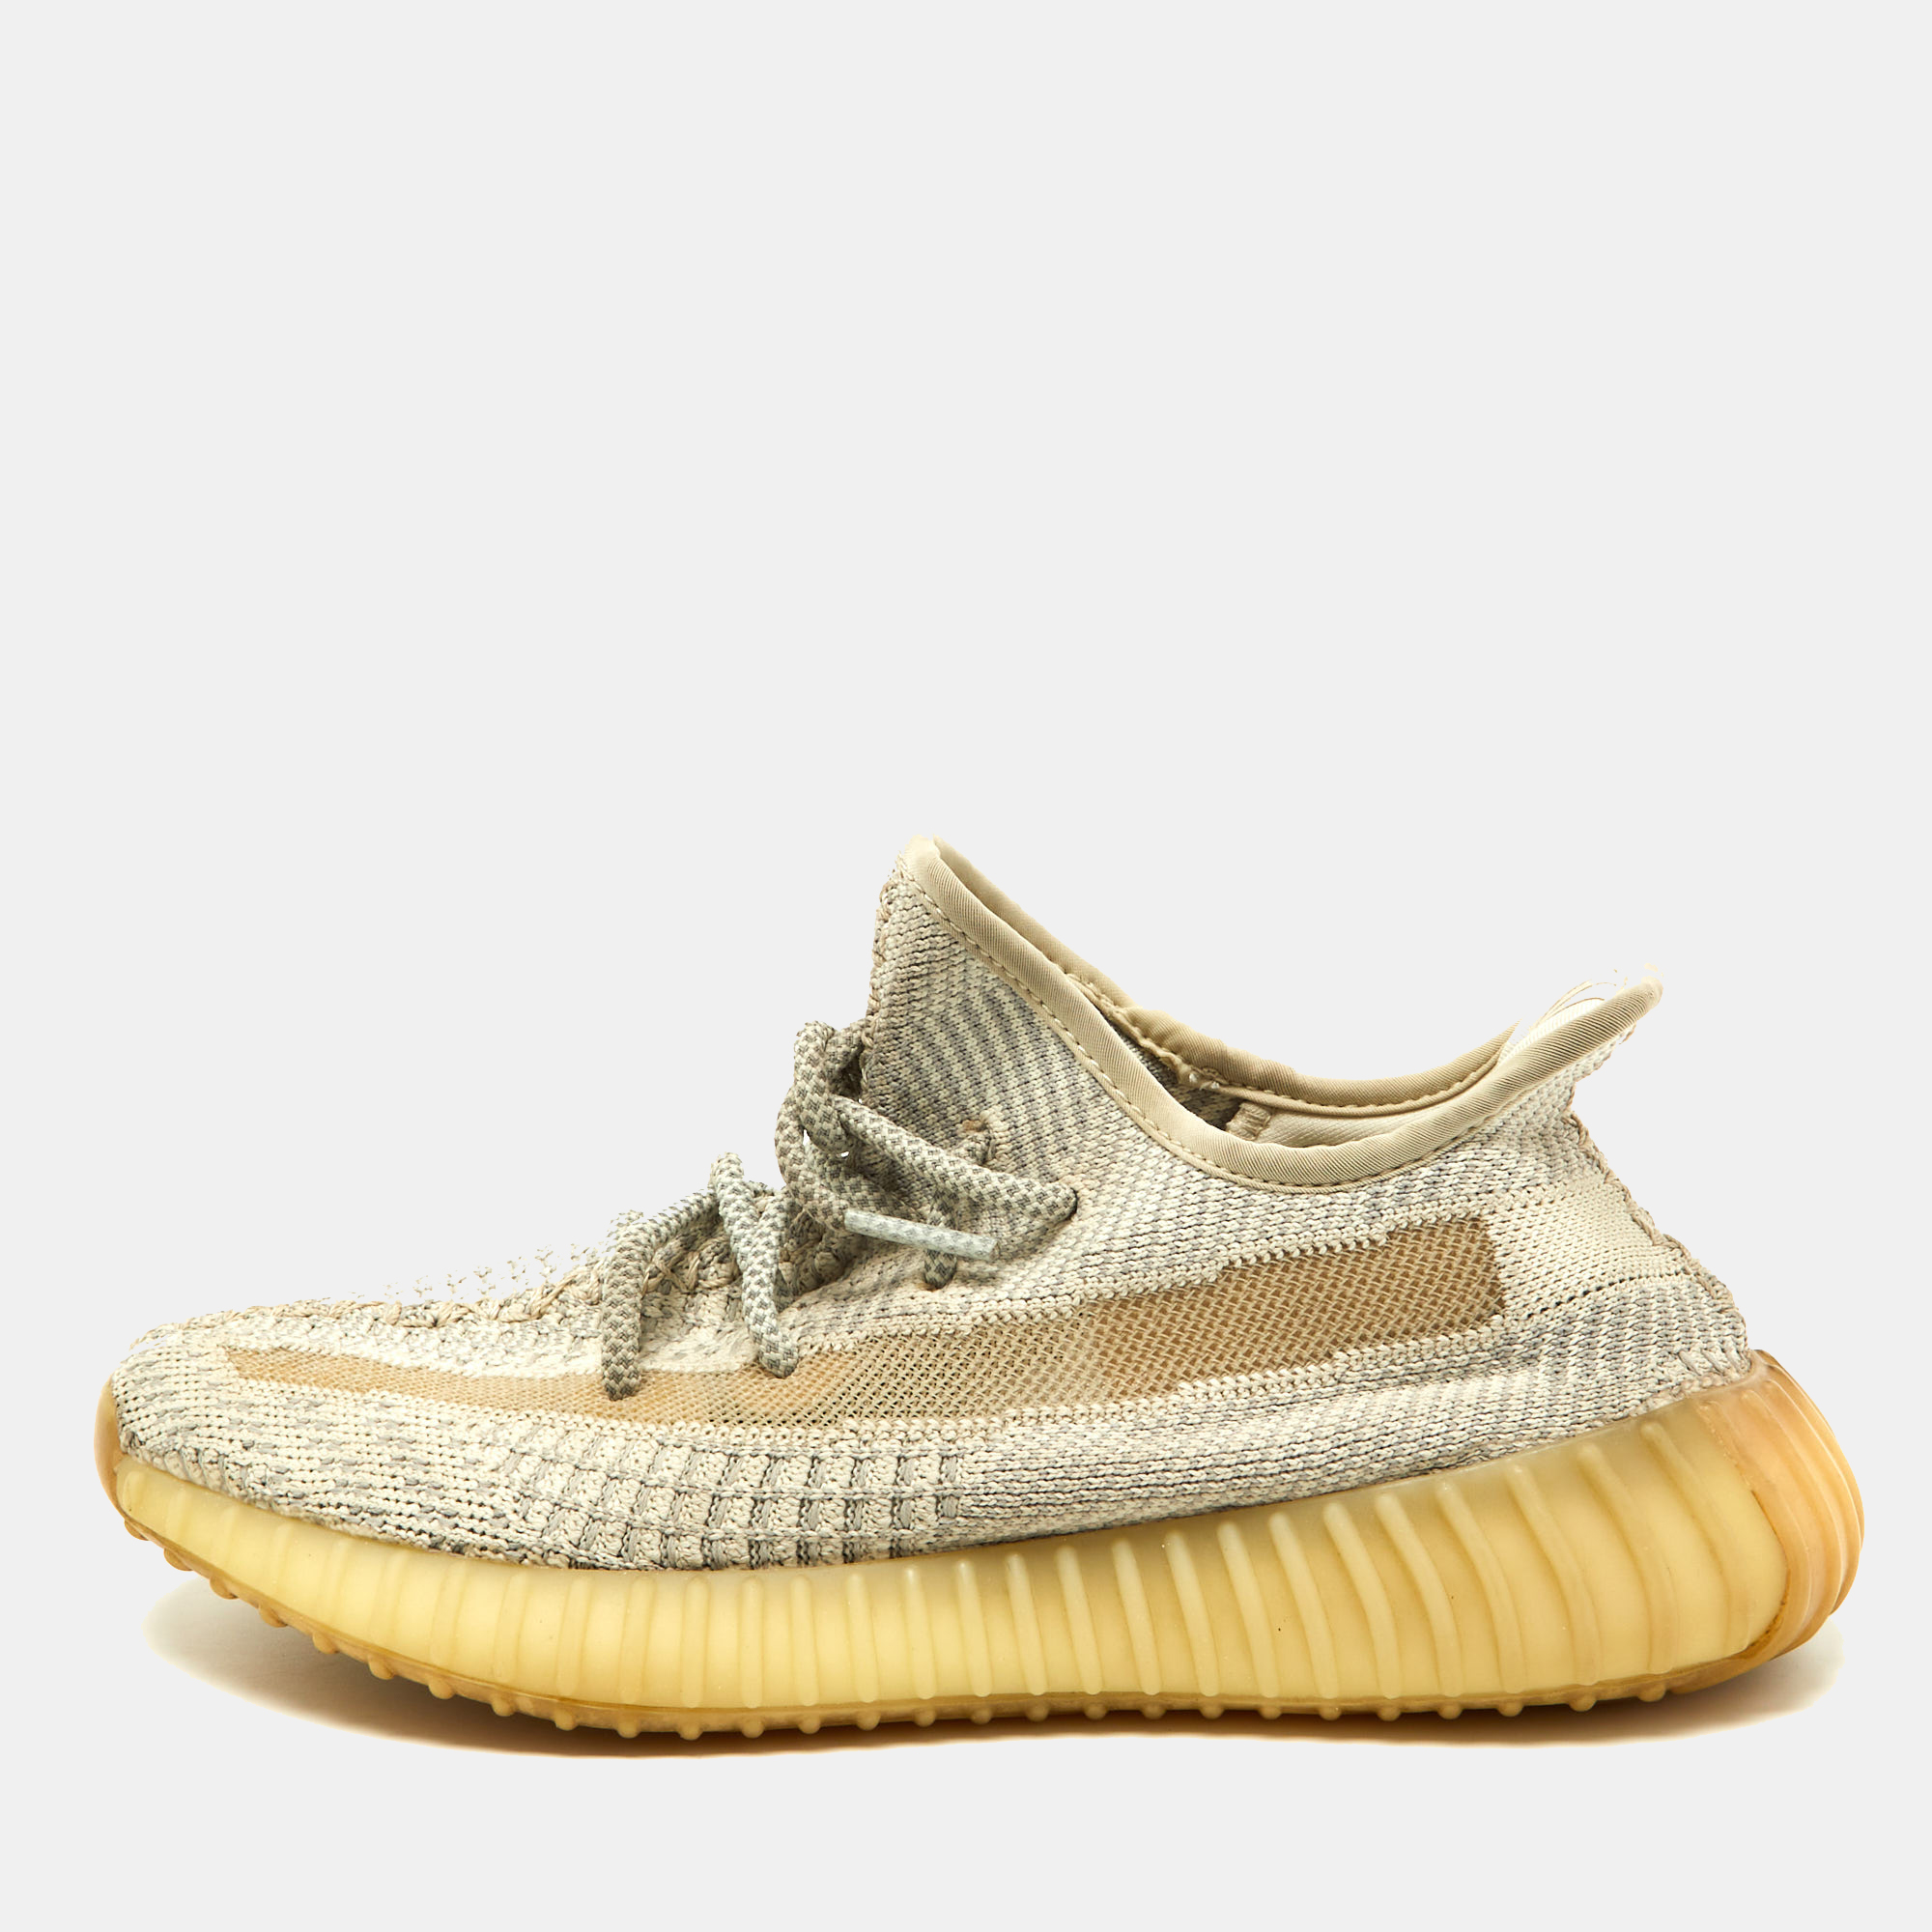 Pre-owned Yeezy X Adidas Boost 350 V2 Lundmark Non-reflective Sneakers Size 38 In Beige